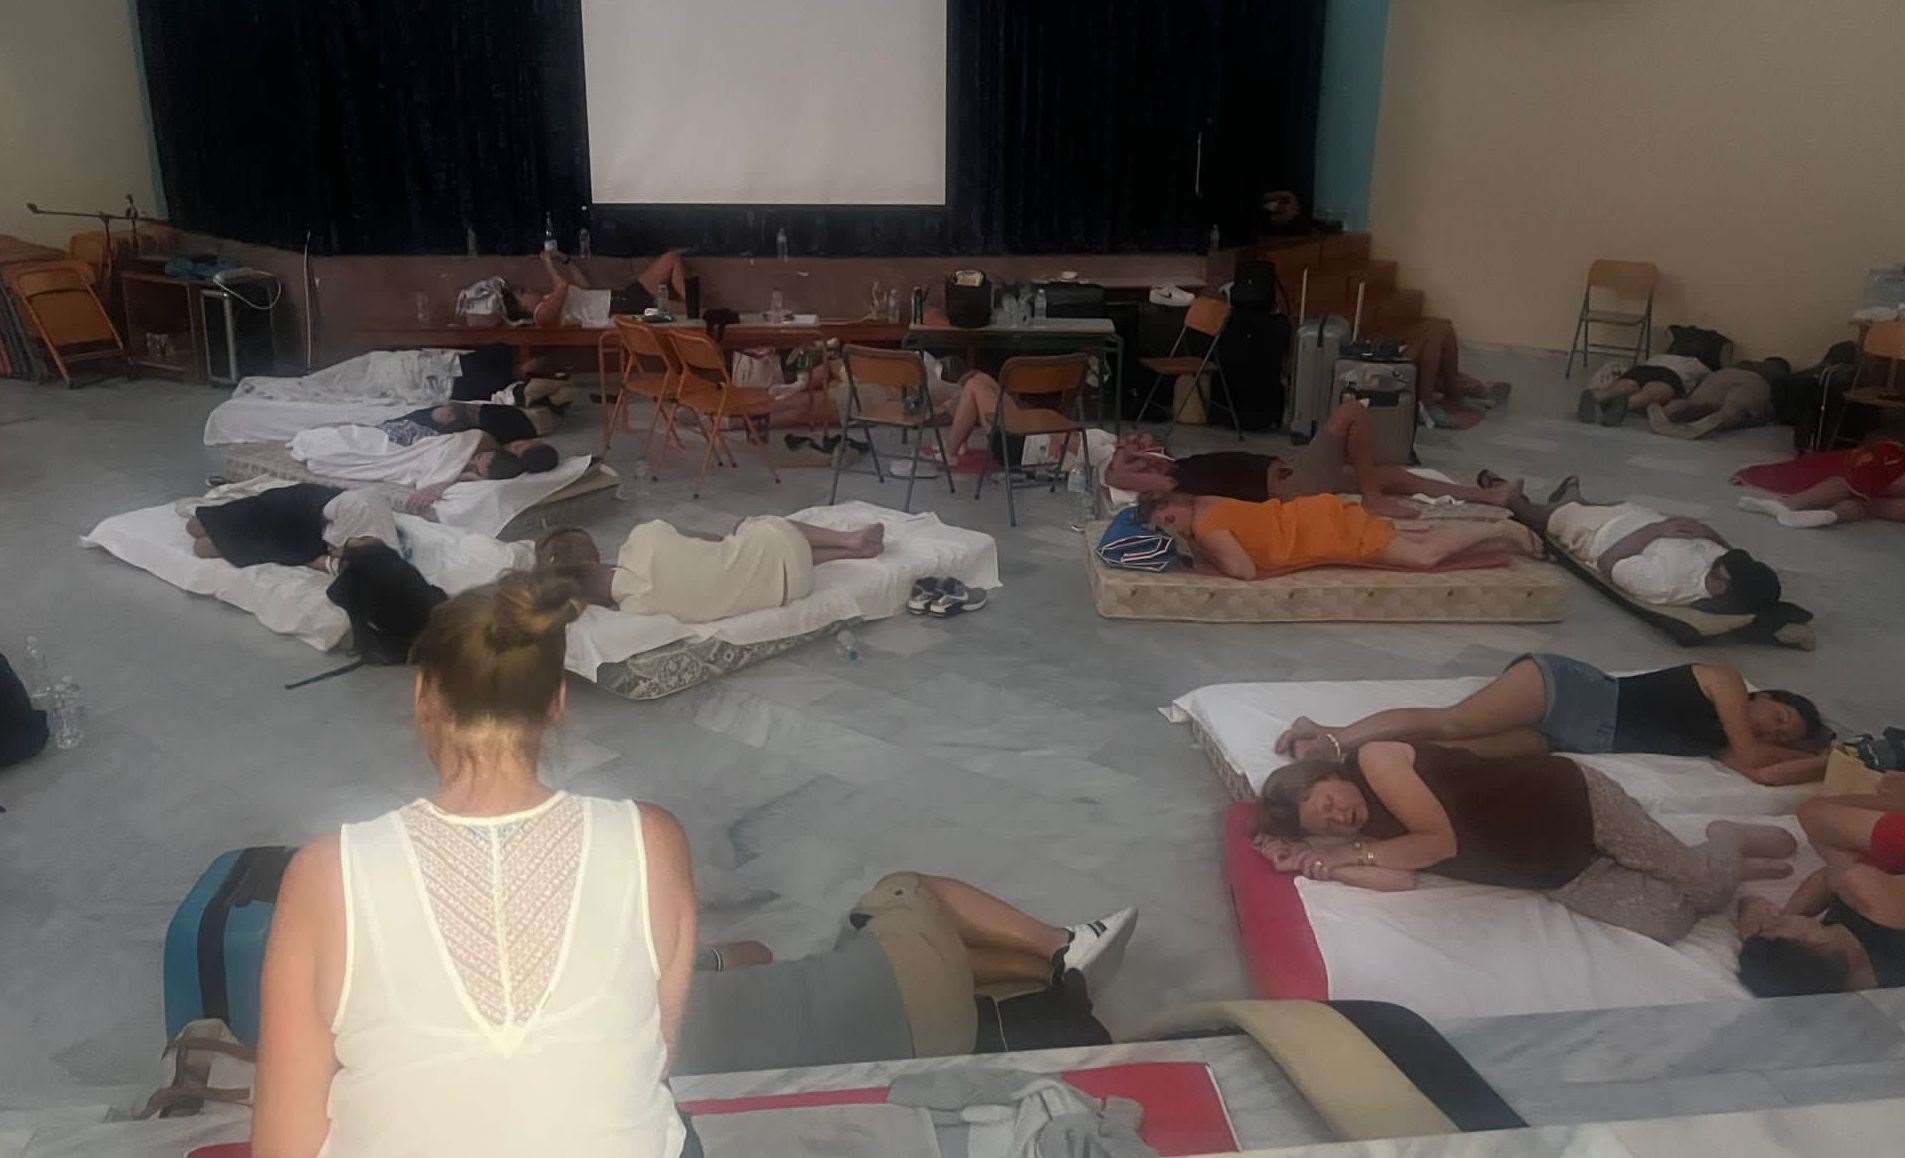 Emily and Alan, as well as some of their friends, had to sleep on the floor of a local school. Picture: Emily Martin